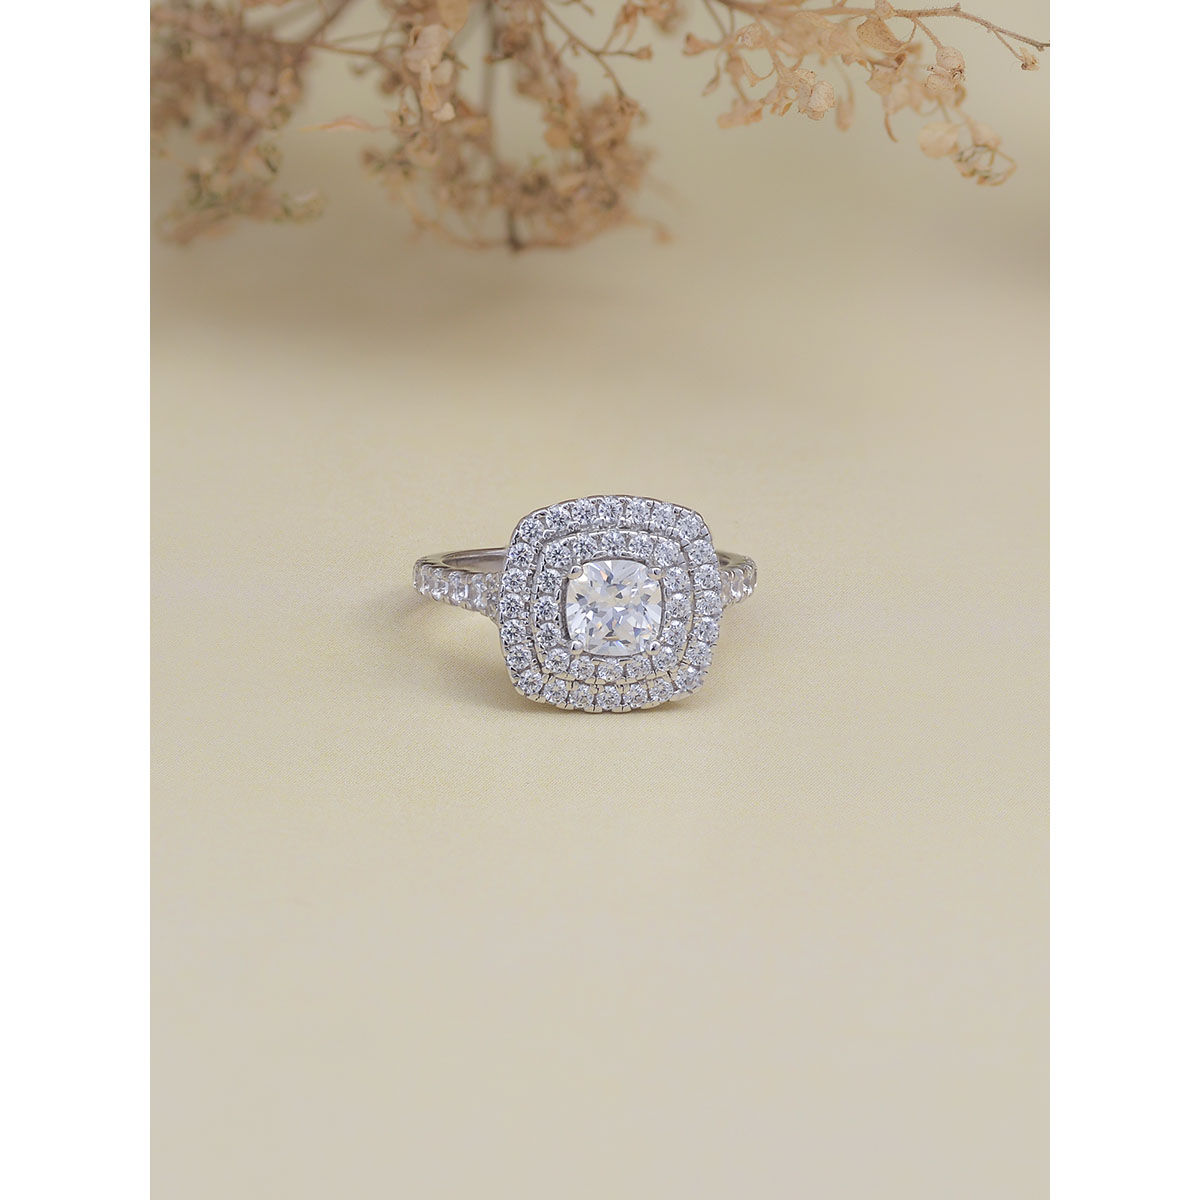 How To Choose The Right Shape For Your Diamond Ring